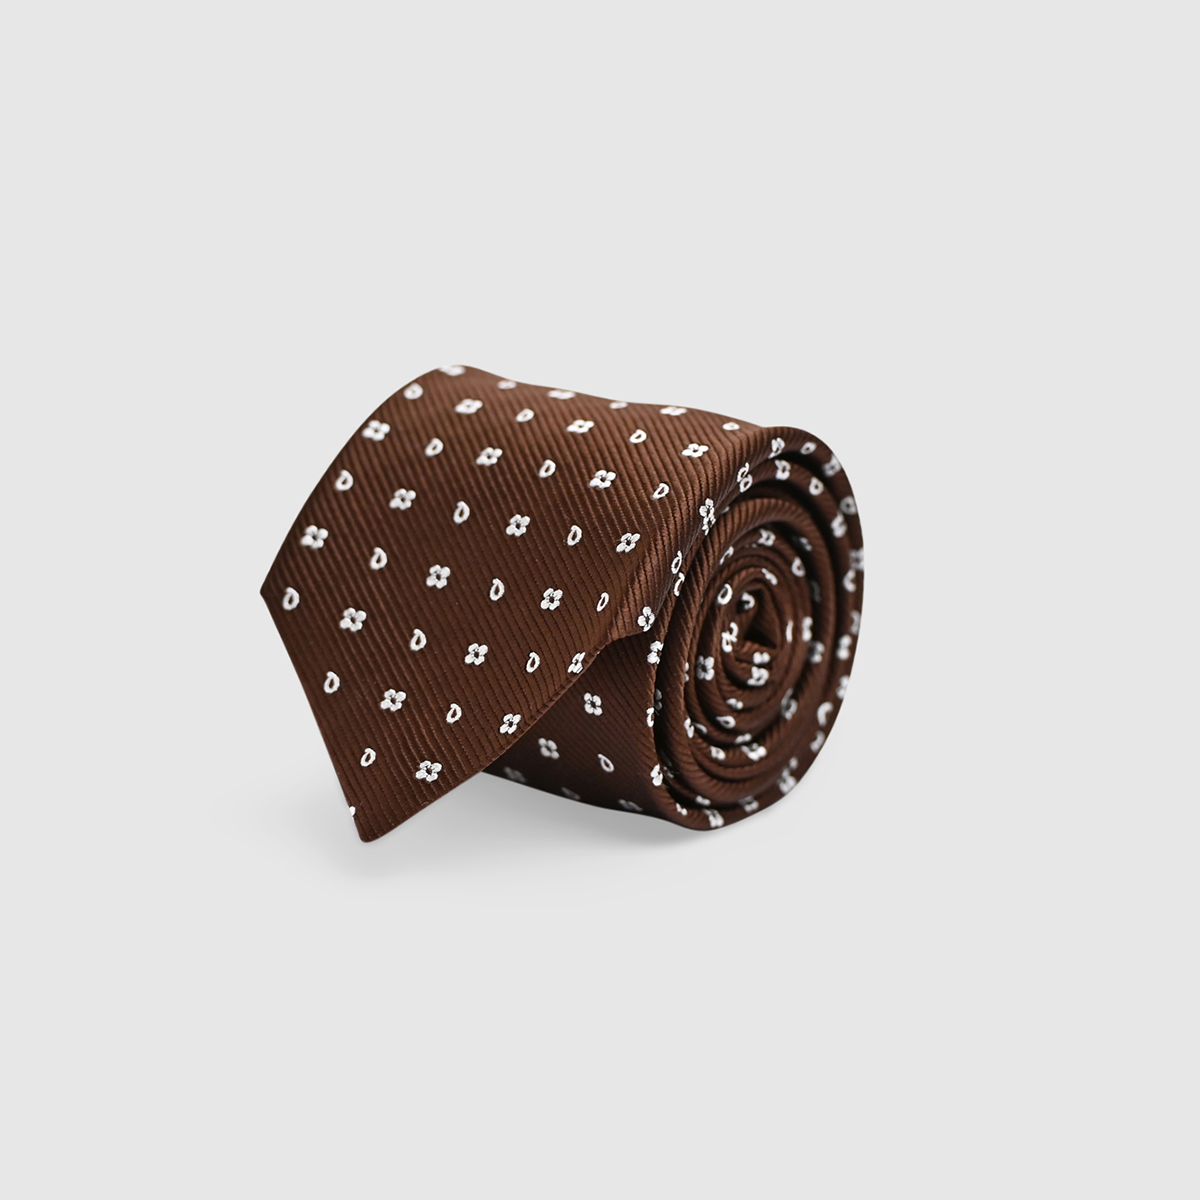 100% Silk Jacquard Tie with Iconic Patterns